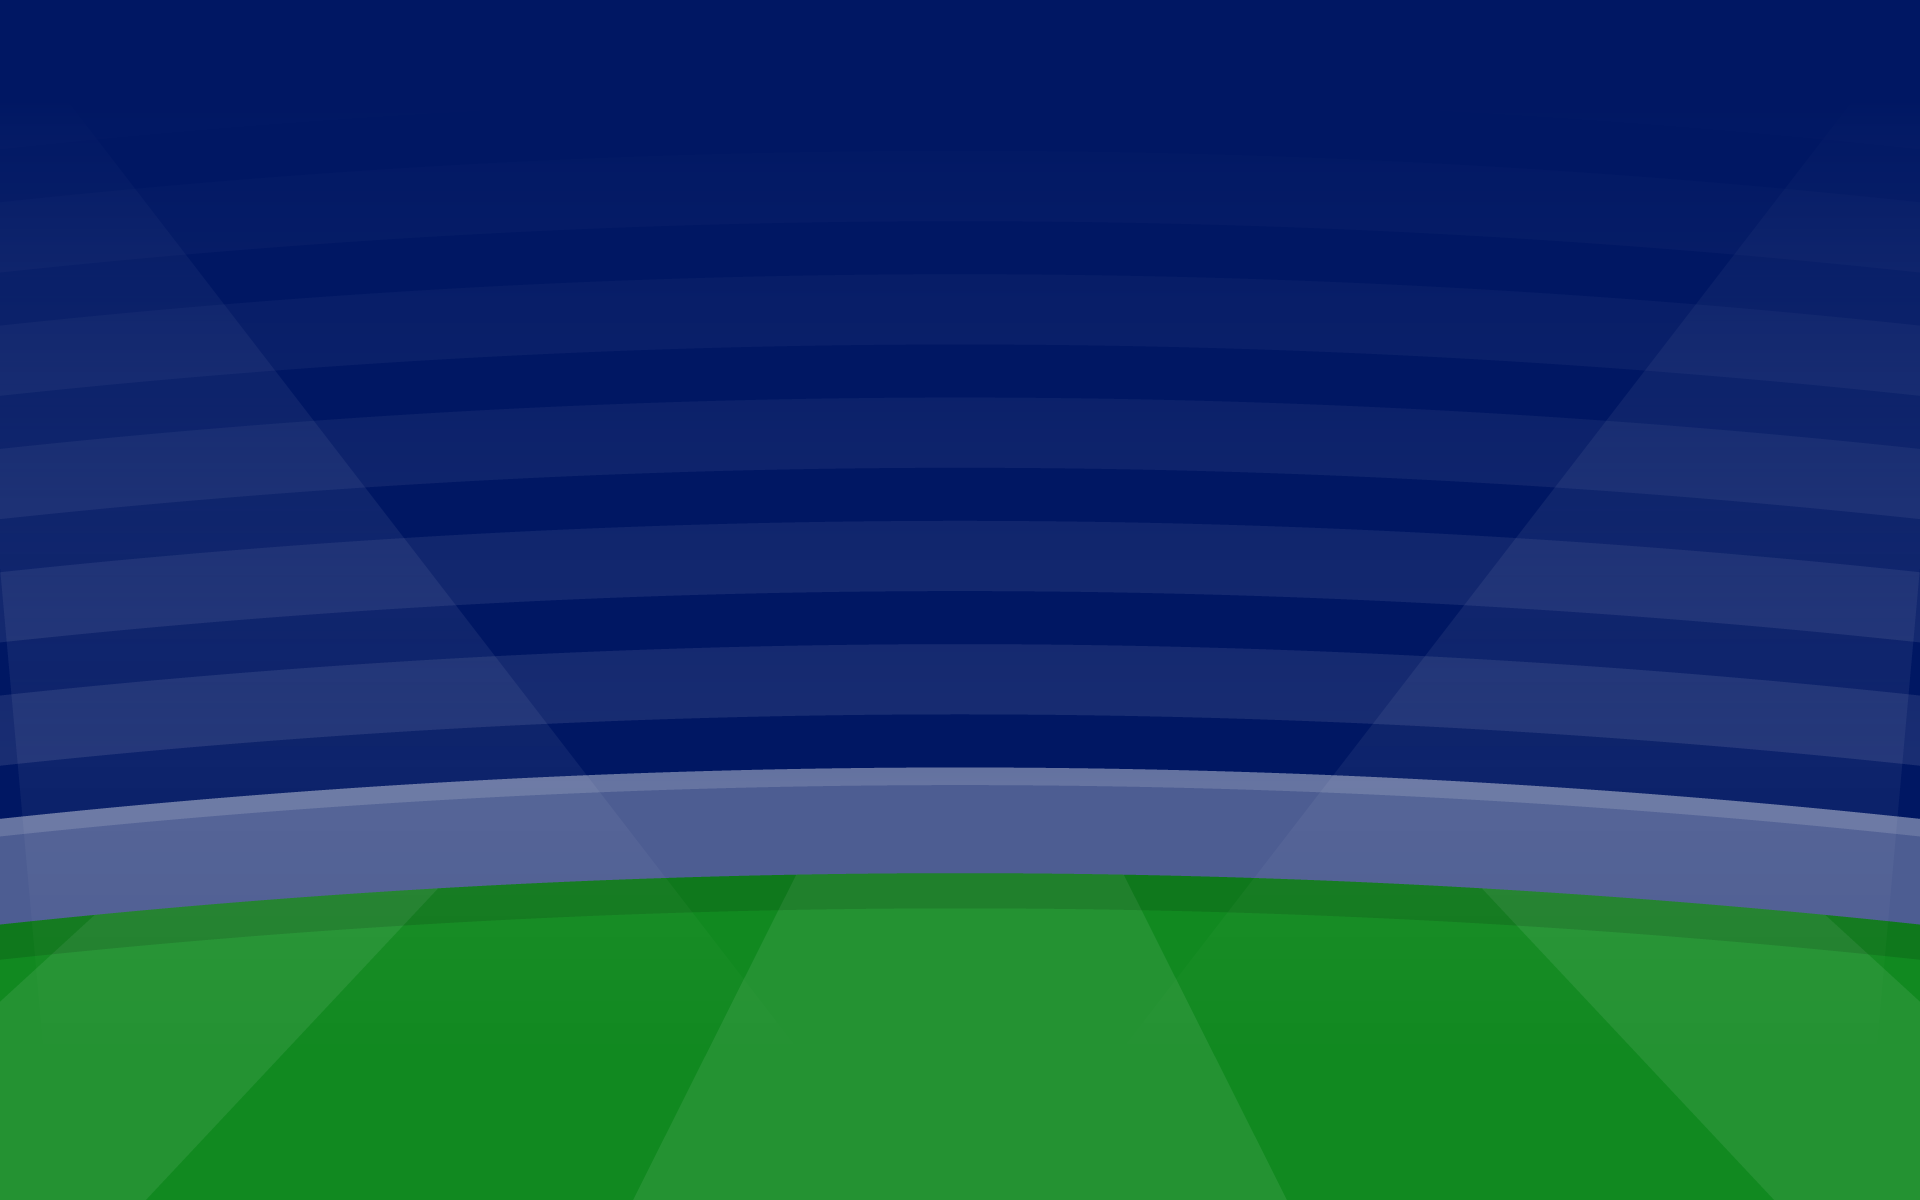 Football Quizmasters Product Page Background